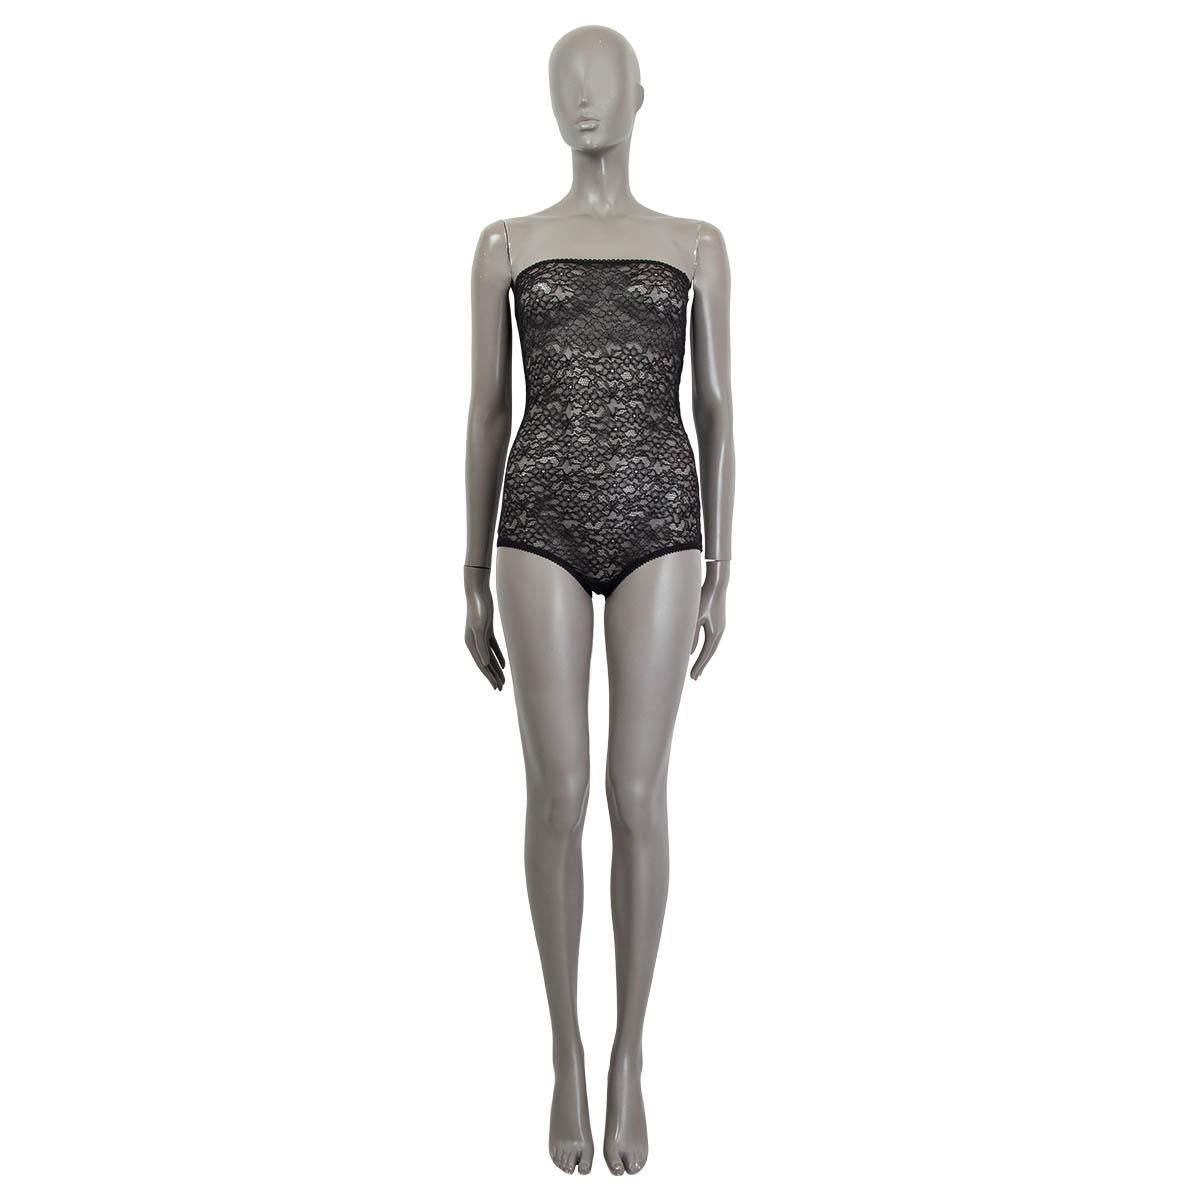 100% authentic Chloé sheer lace strapless bodysuit in black viscose-elastane blend (please note content and size tag are missing). Features a scalloped hem. Unlined. Has been worn once and is in virtually new condition.

Measurements
Tag